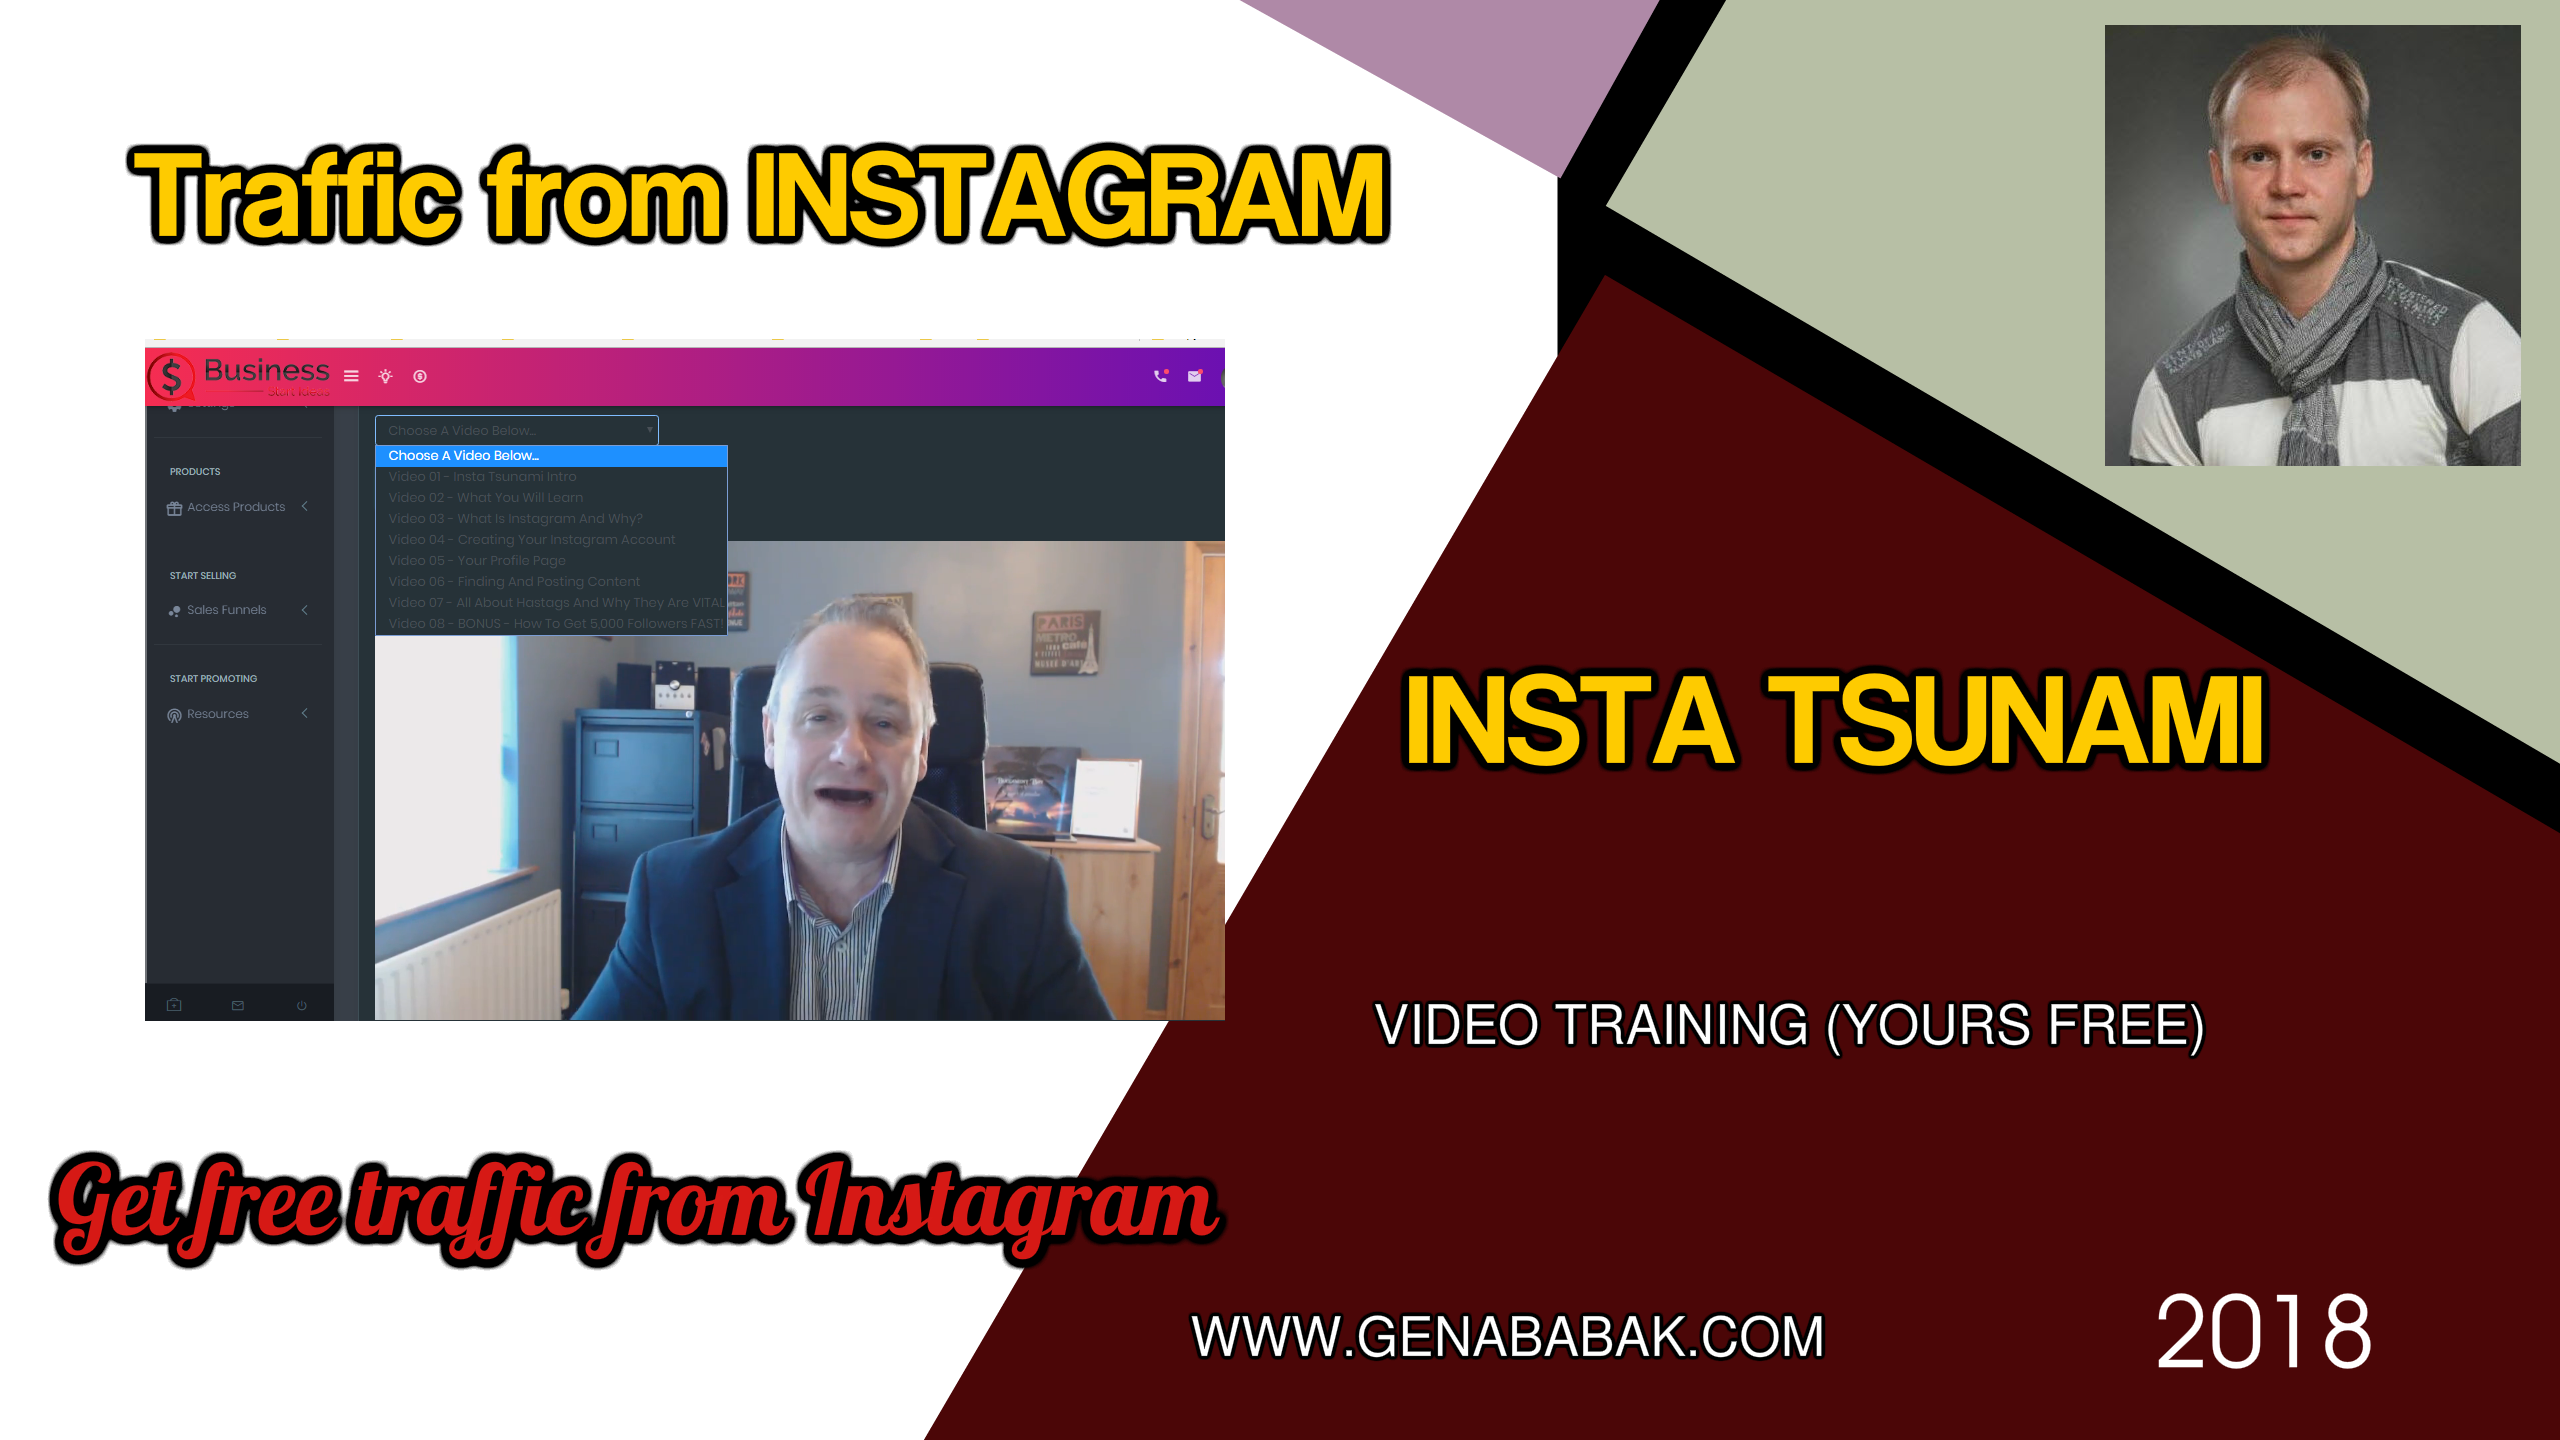 How to drive traffic from Instagram - INSTA TSUNAMI Review